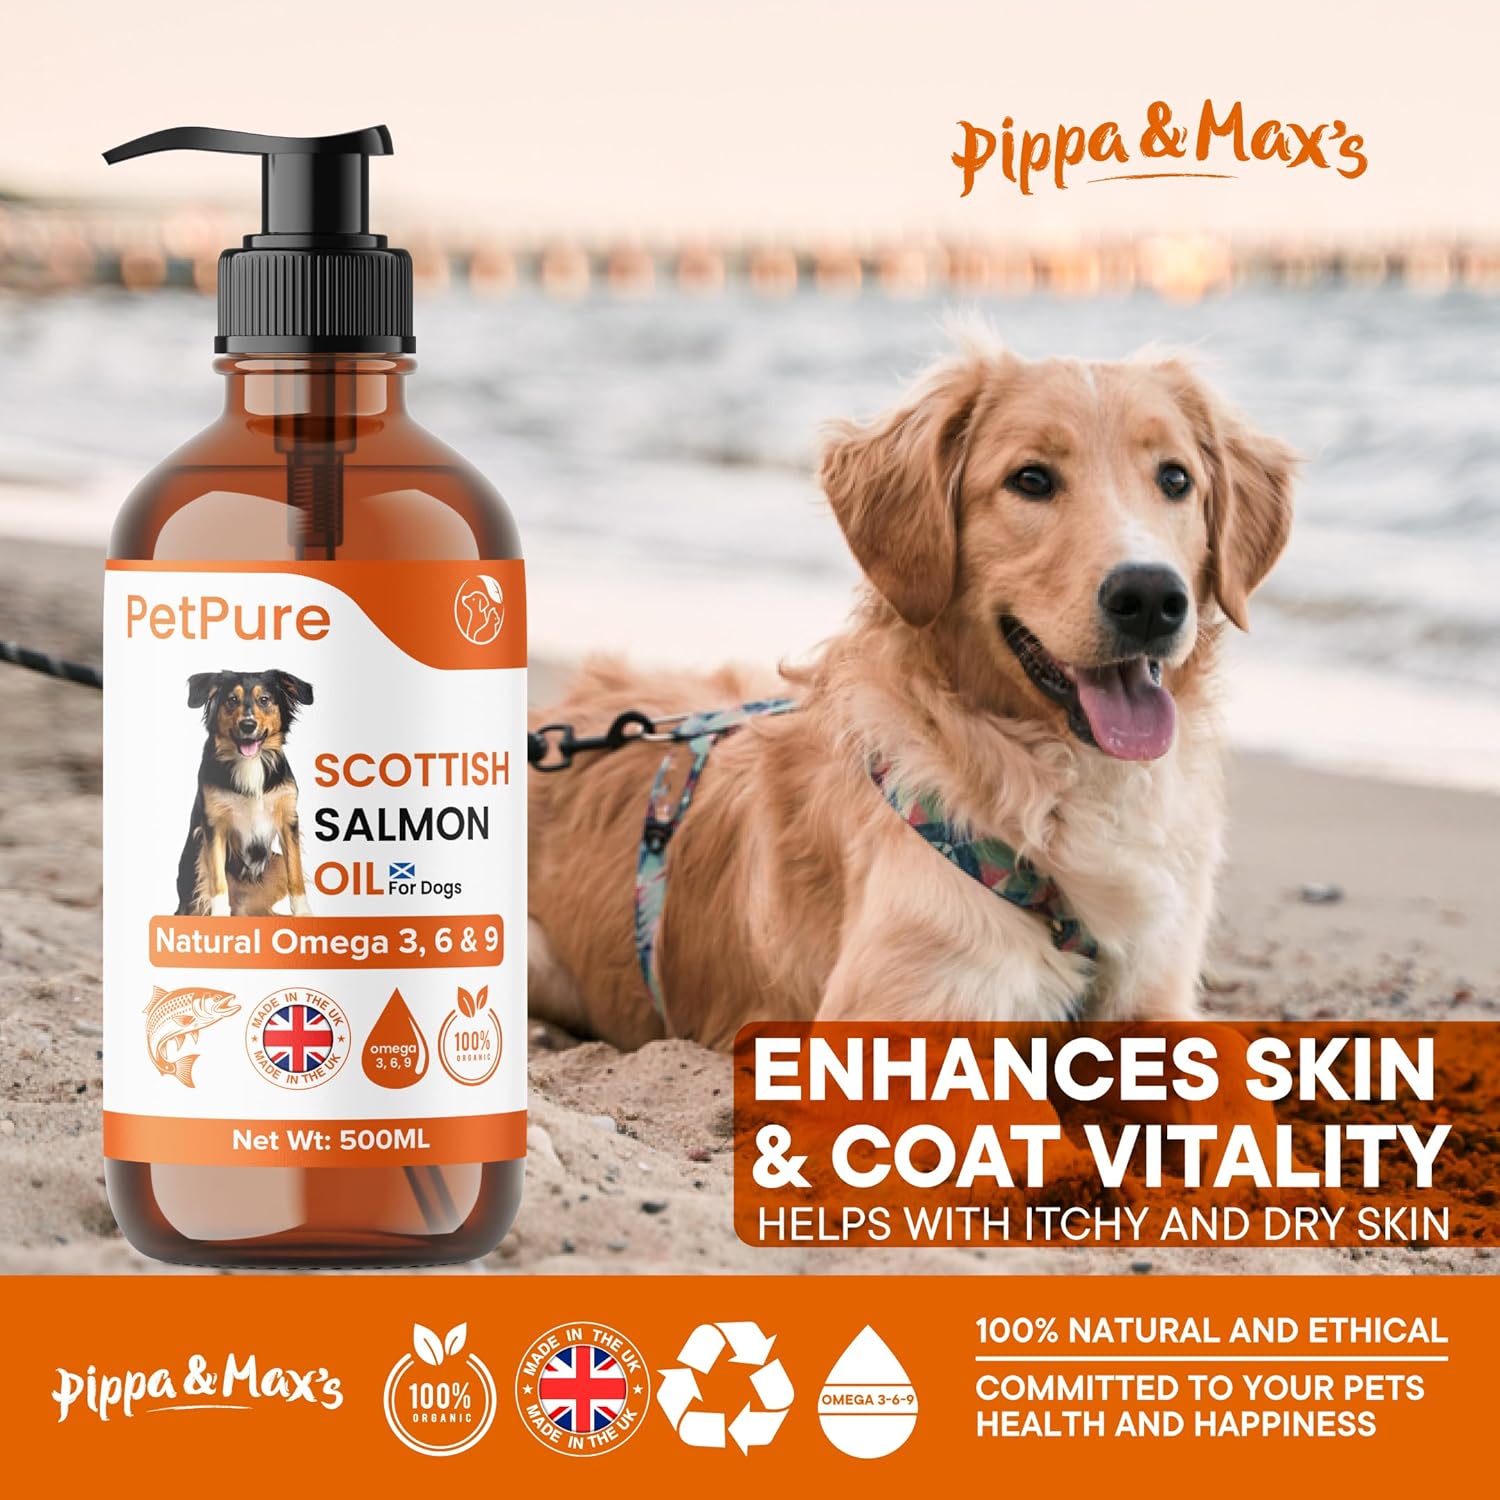 Pippa & Max Scottish Salmon Oil for Dogs & Pets (500ml) - Pure Omega 3, 6 & 9 Fish Oil Liquid Supplement for Natural Coat, Immune Support, Skin Comfort, and Overall Health